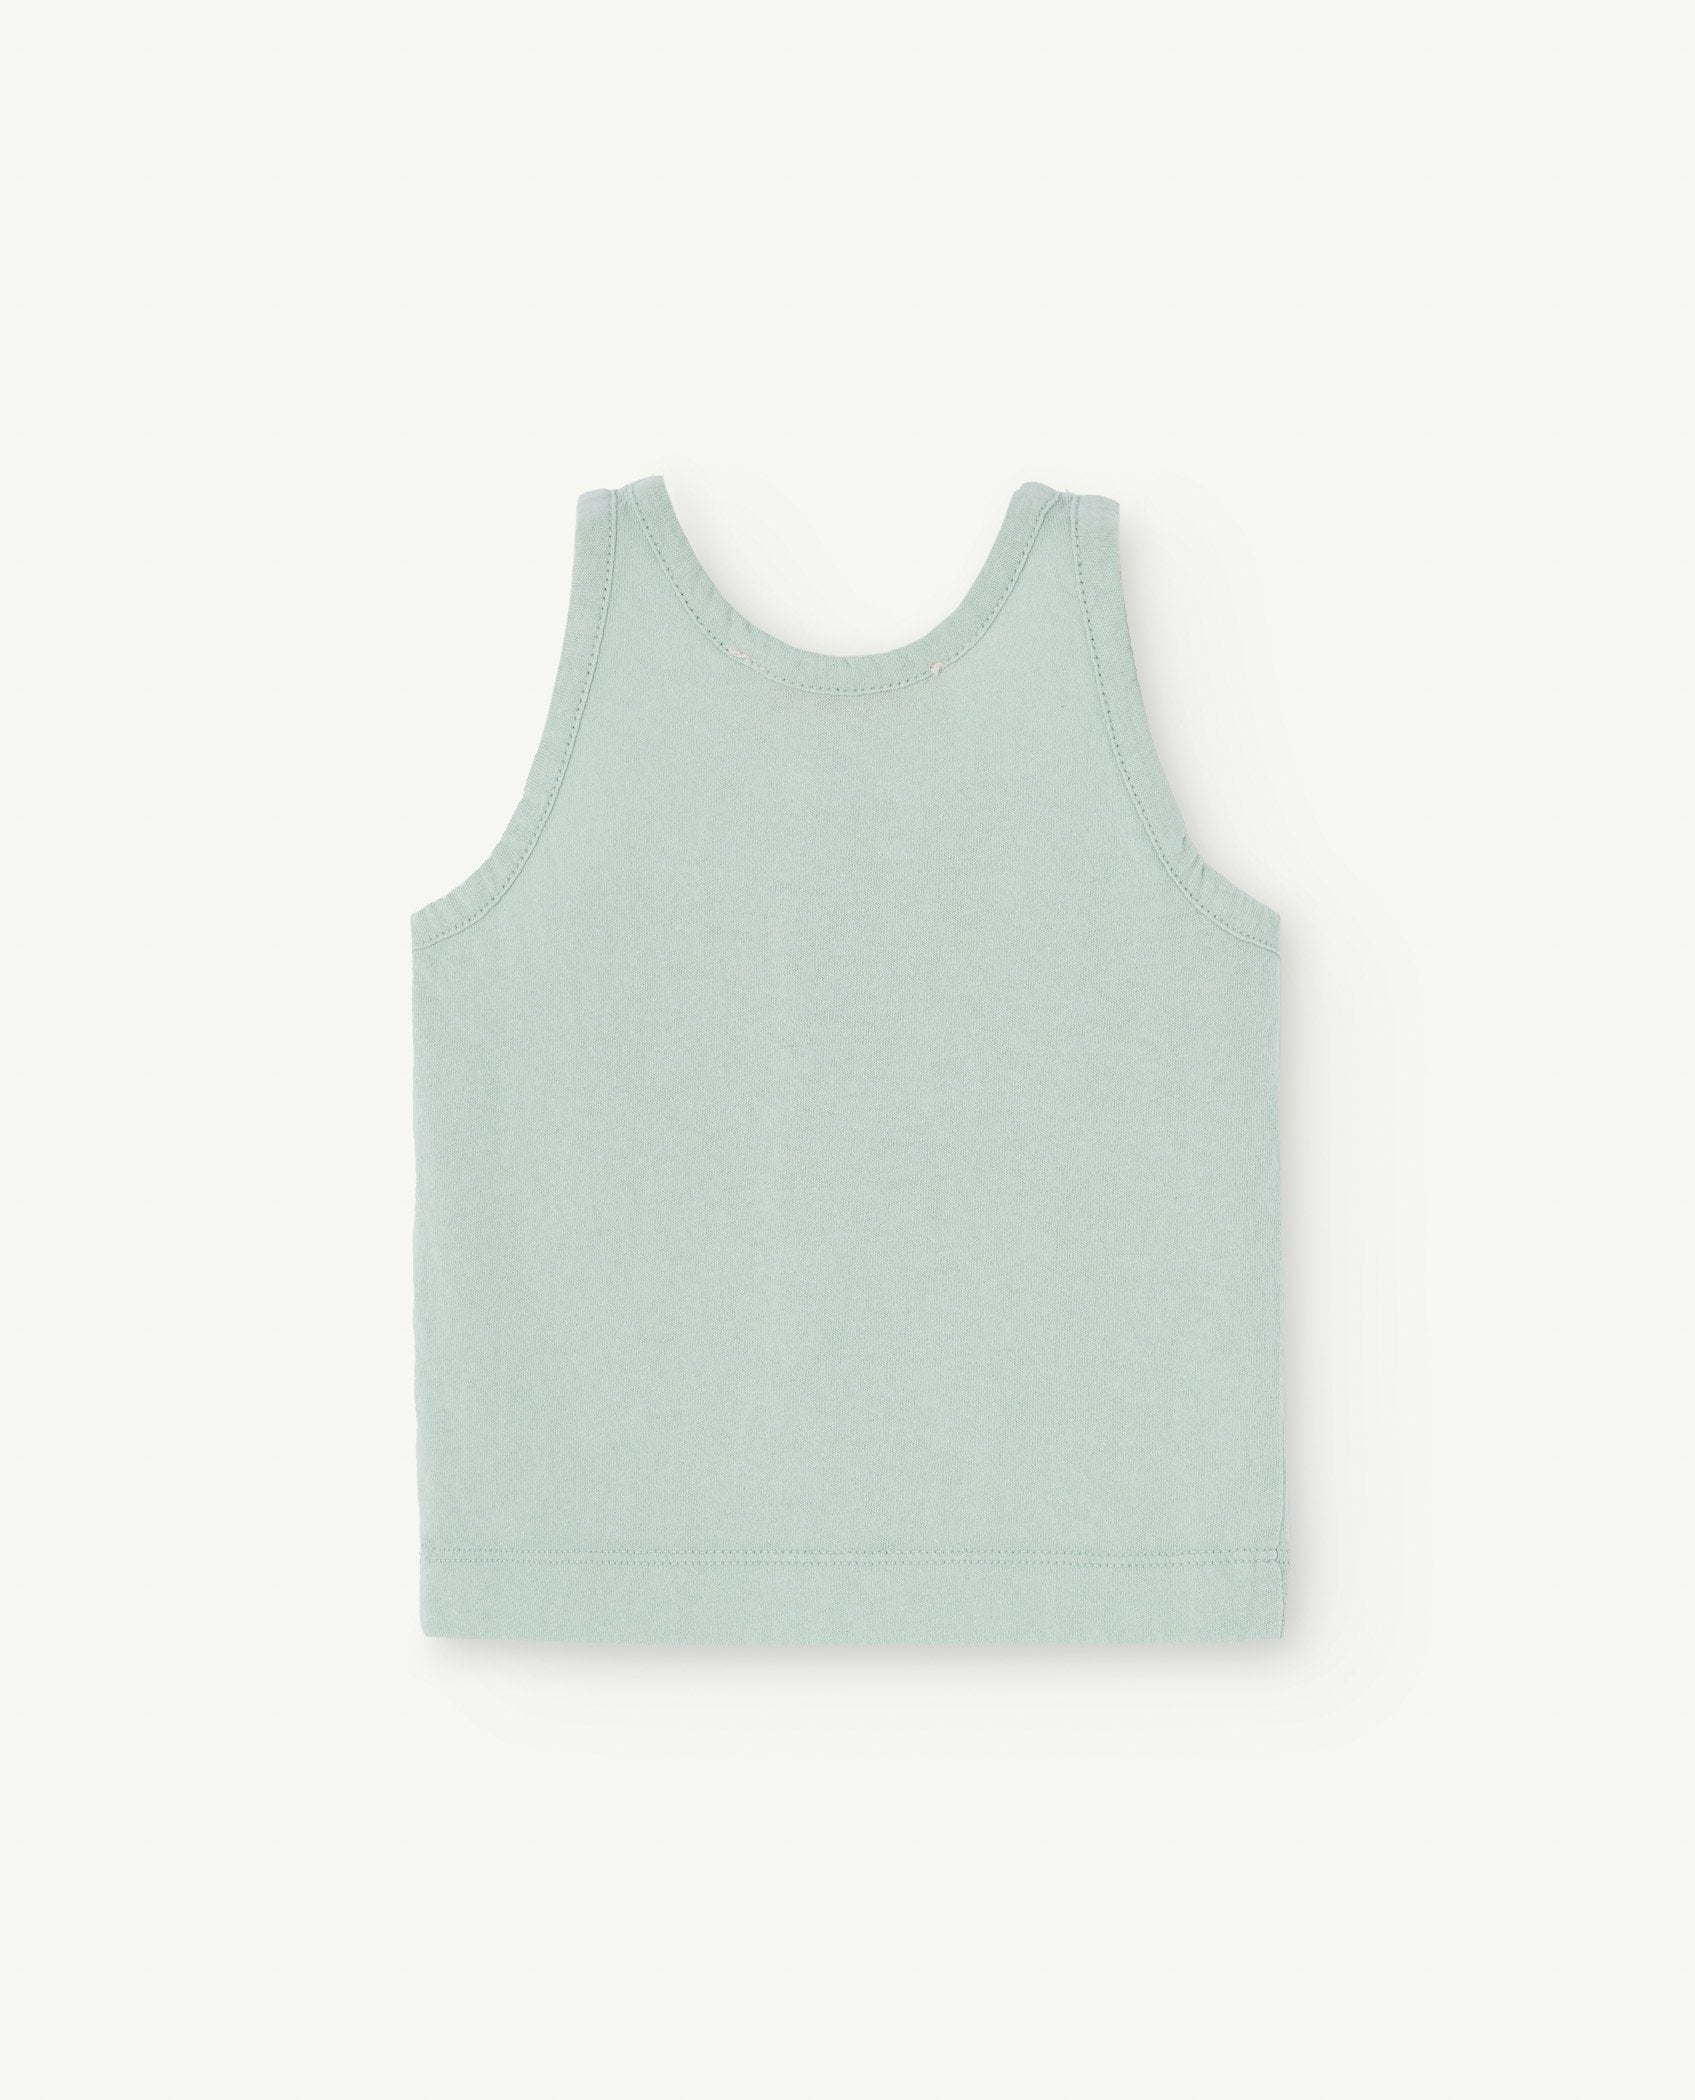 Turquoise Frog Baby Tank Top PRODUCT BACK